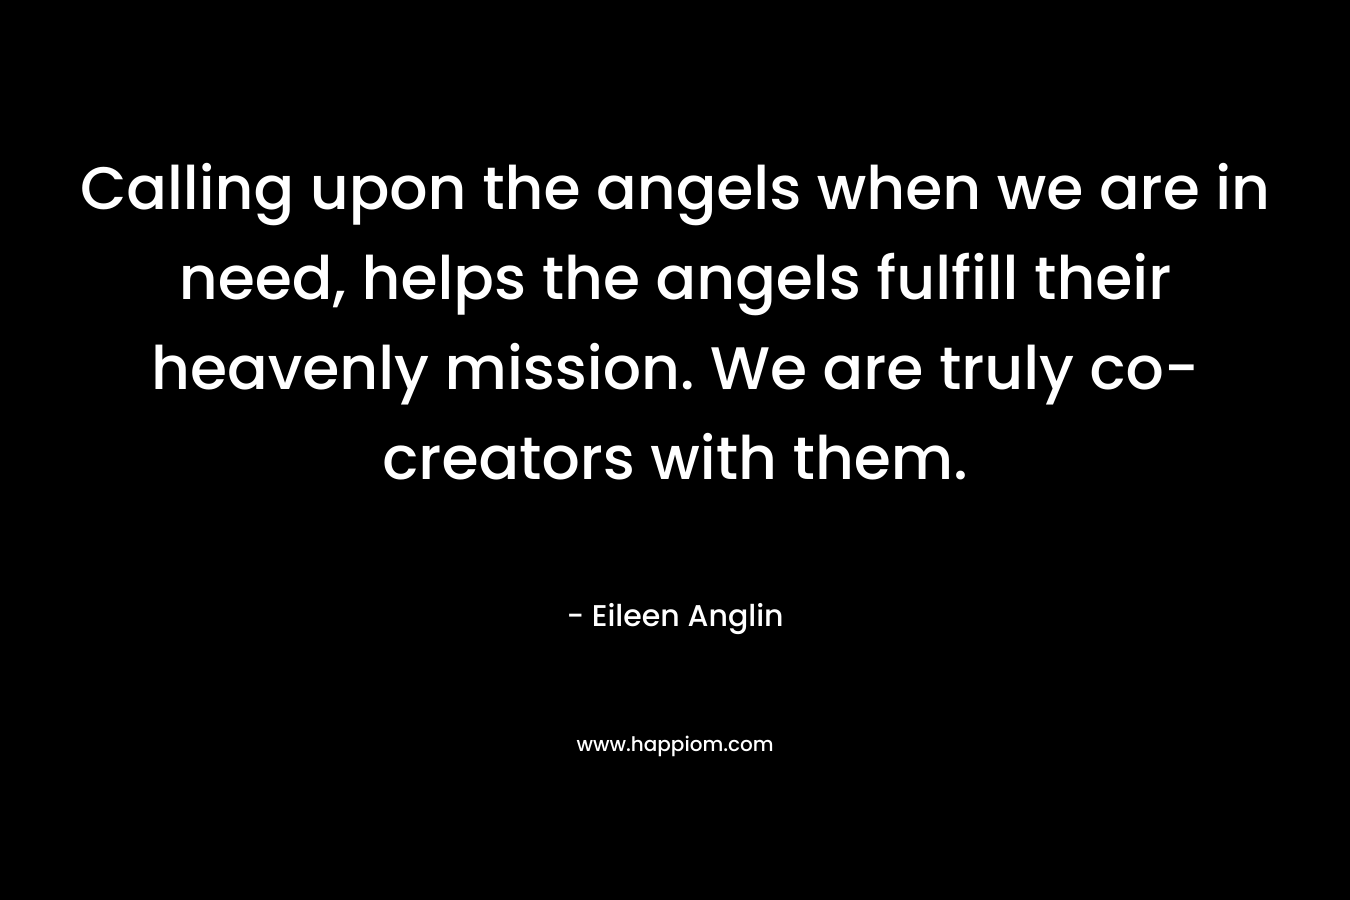 Calling upon the angels when we are in need, helps the angels fulfill their heavenly mission. We are truly co-creators with them.